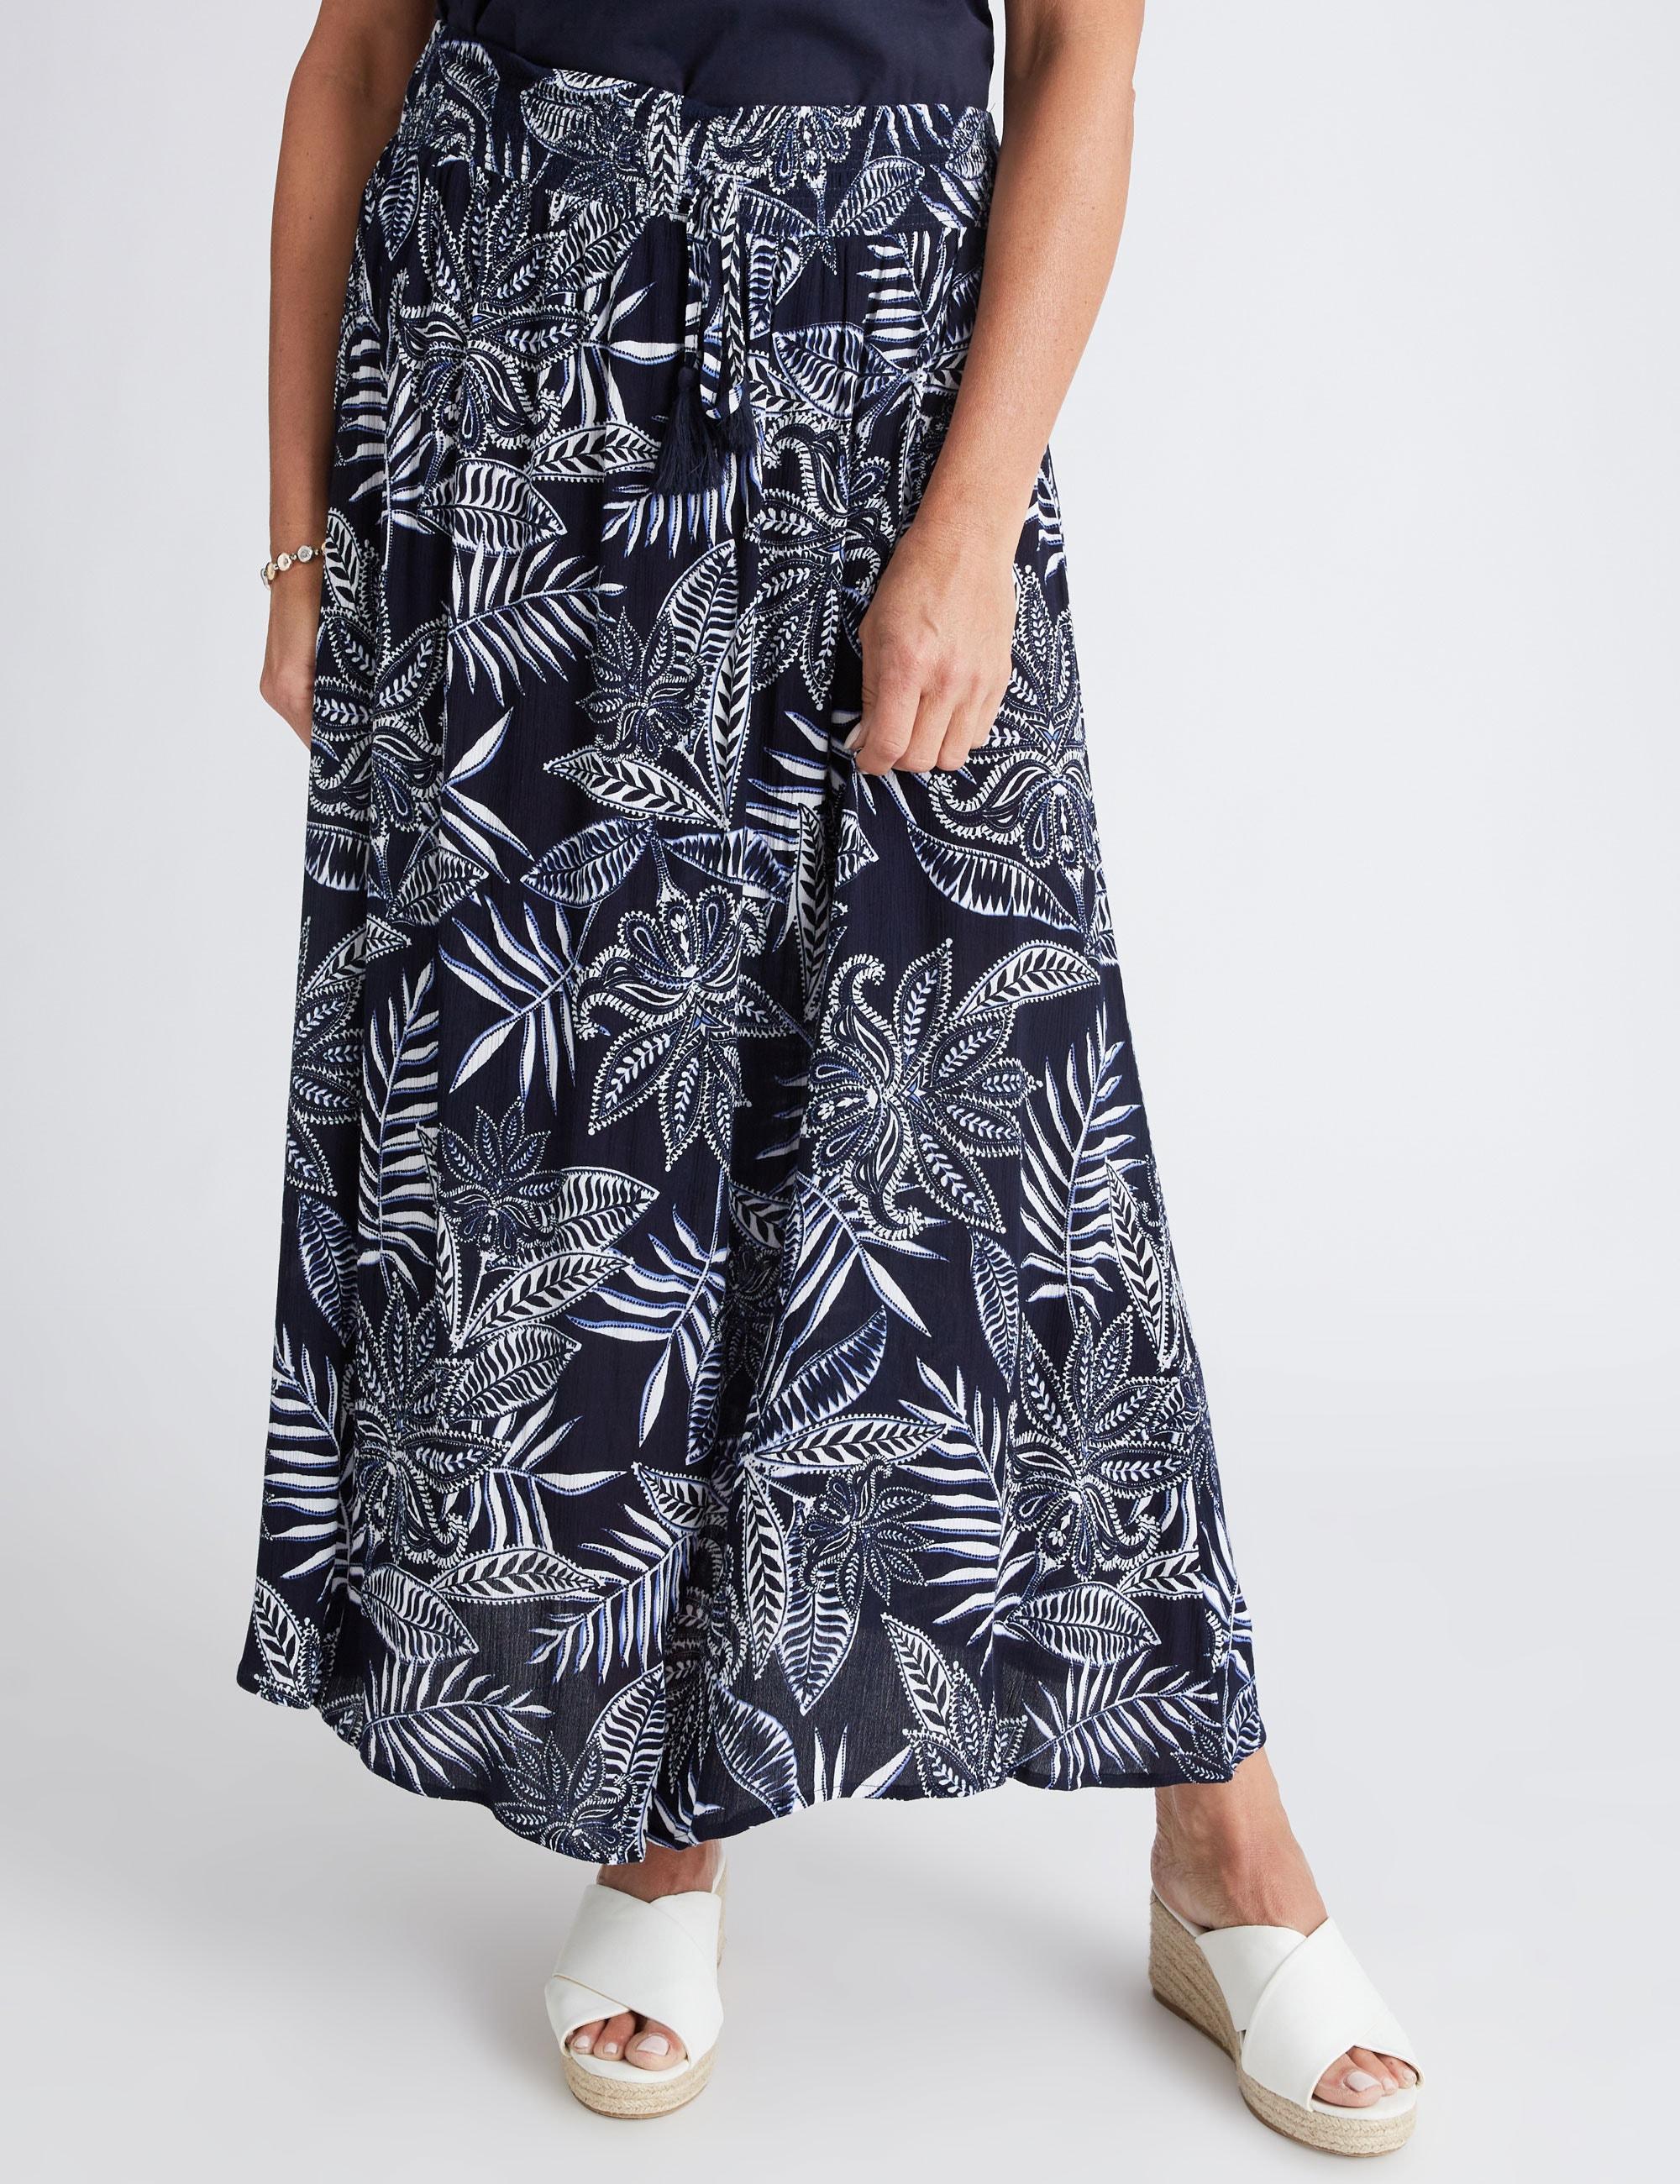 MILLERS - Womens Skirts - Maxi - Summer - Green - Paisley - A Line - Fashion - Mono Leaf - Relaxed Fit - Prined Crinkle - Long - Casual Work Clothes